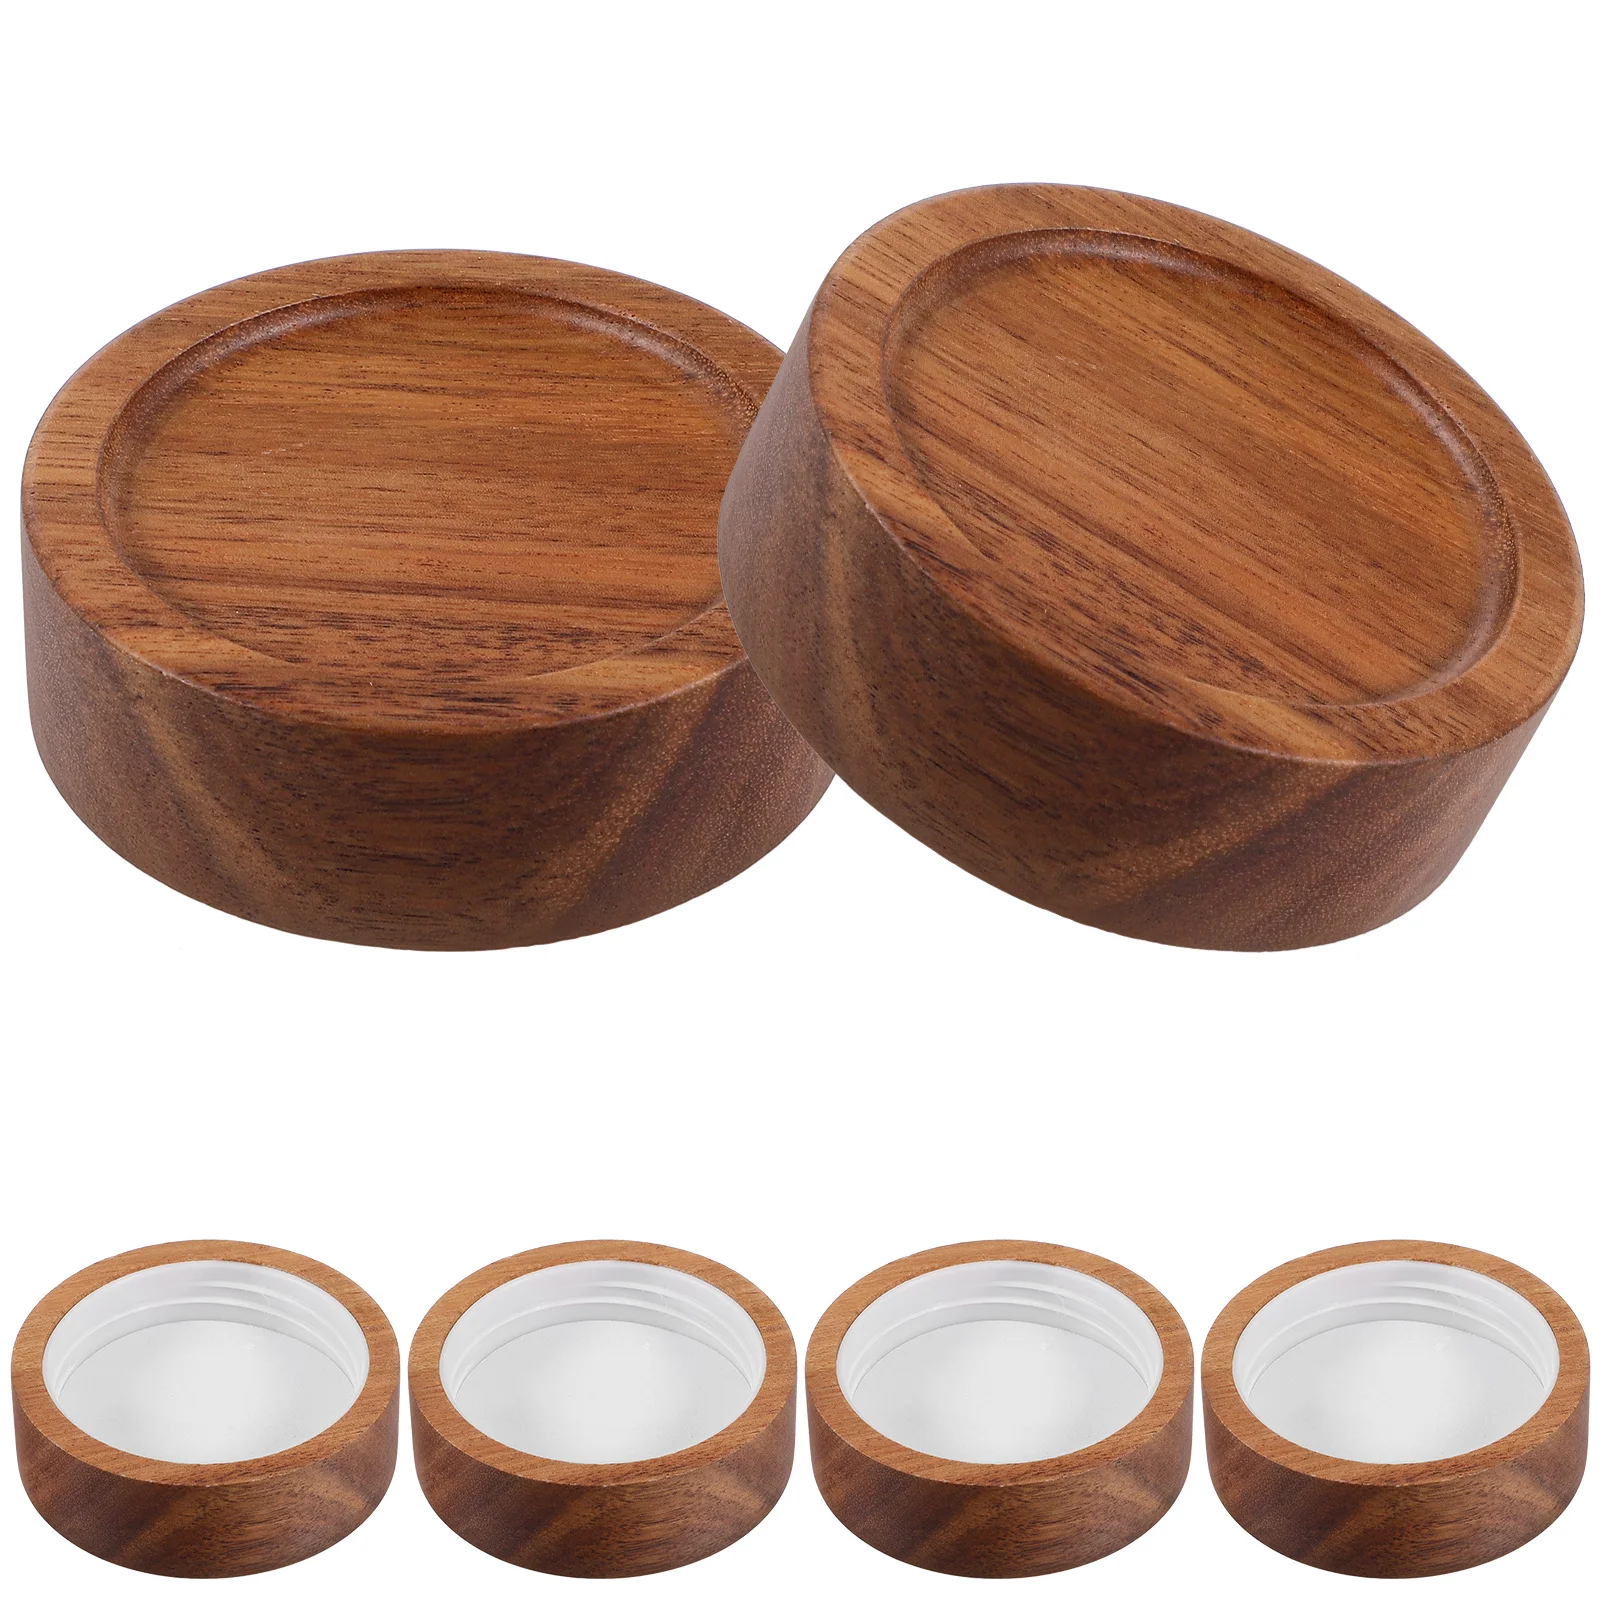 

6 Pcs Mason Jar Lids Glass Sealing Bottle Storage Beverage Leakproof Acacia Wood Cover Drink Can Covers Canning Wooden